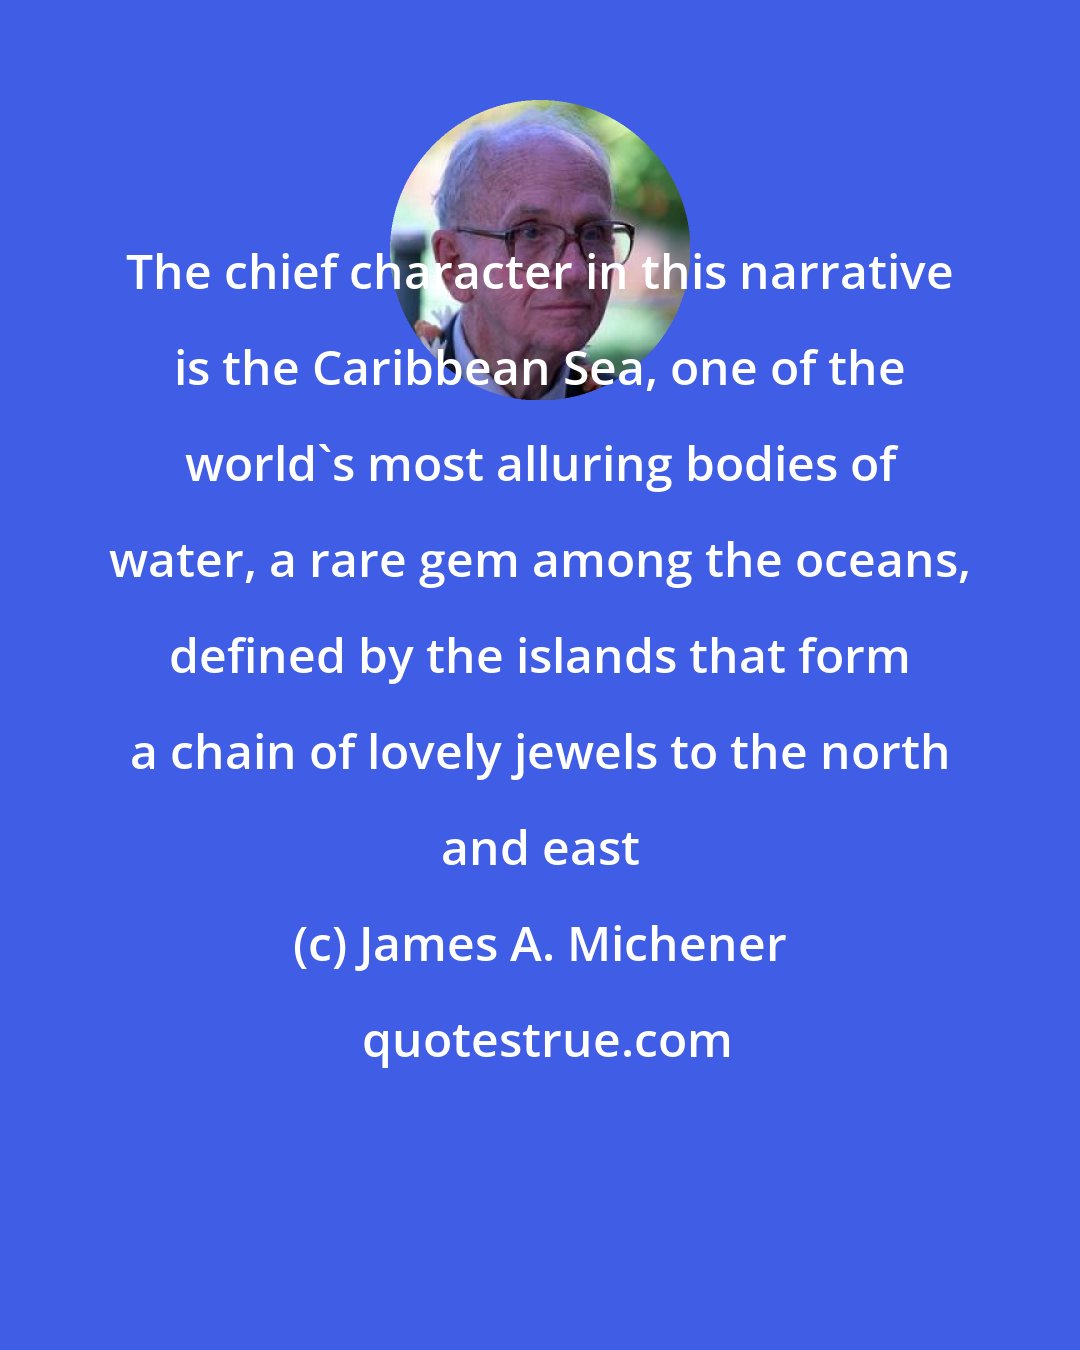 James A. Michener: The chief character in this narrative is the Caribbean Sea, one of the world's most alluring bodies of water, a rare gem among the oceans, defined by the islands that form a chain of lovely jewels to the north and east